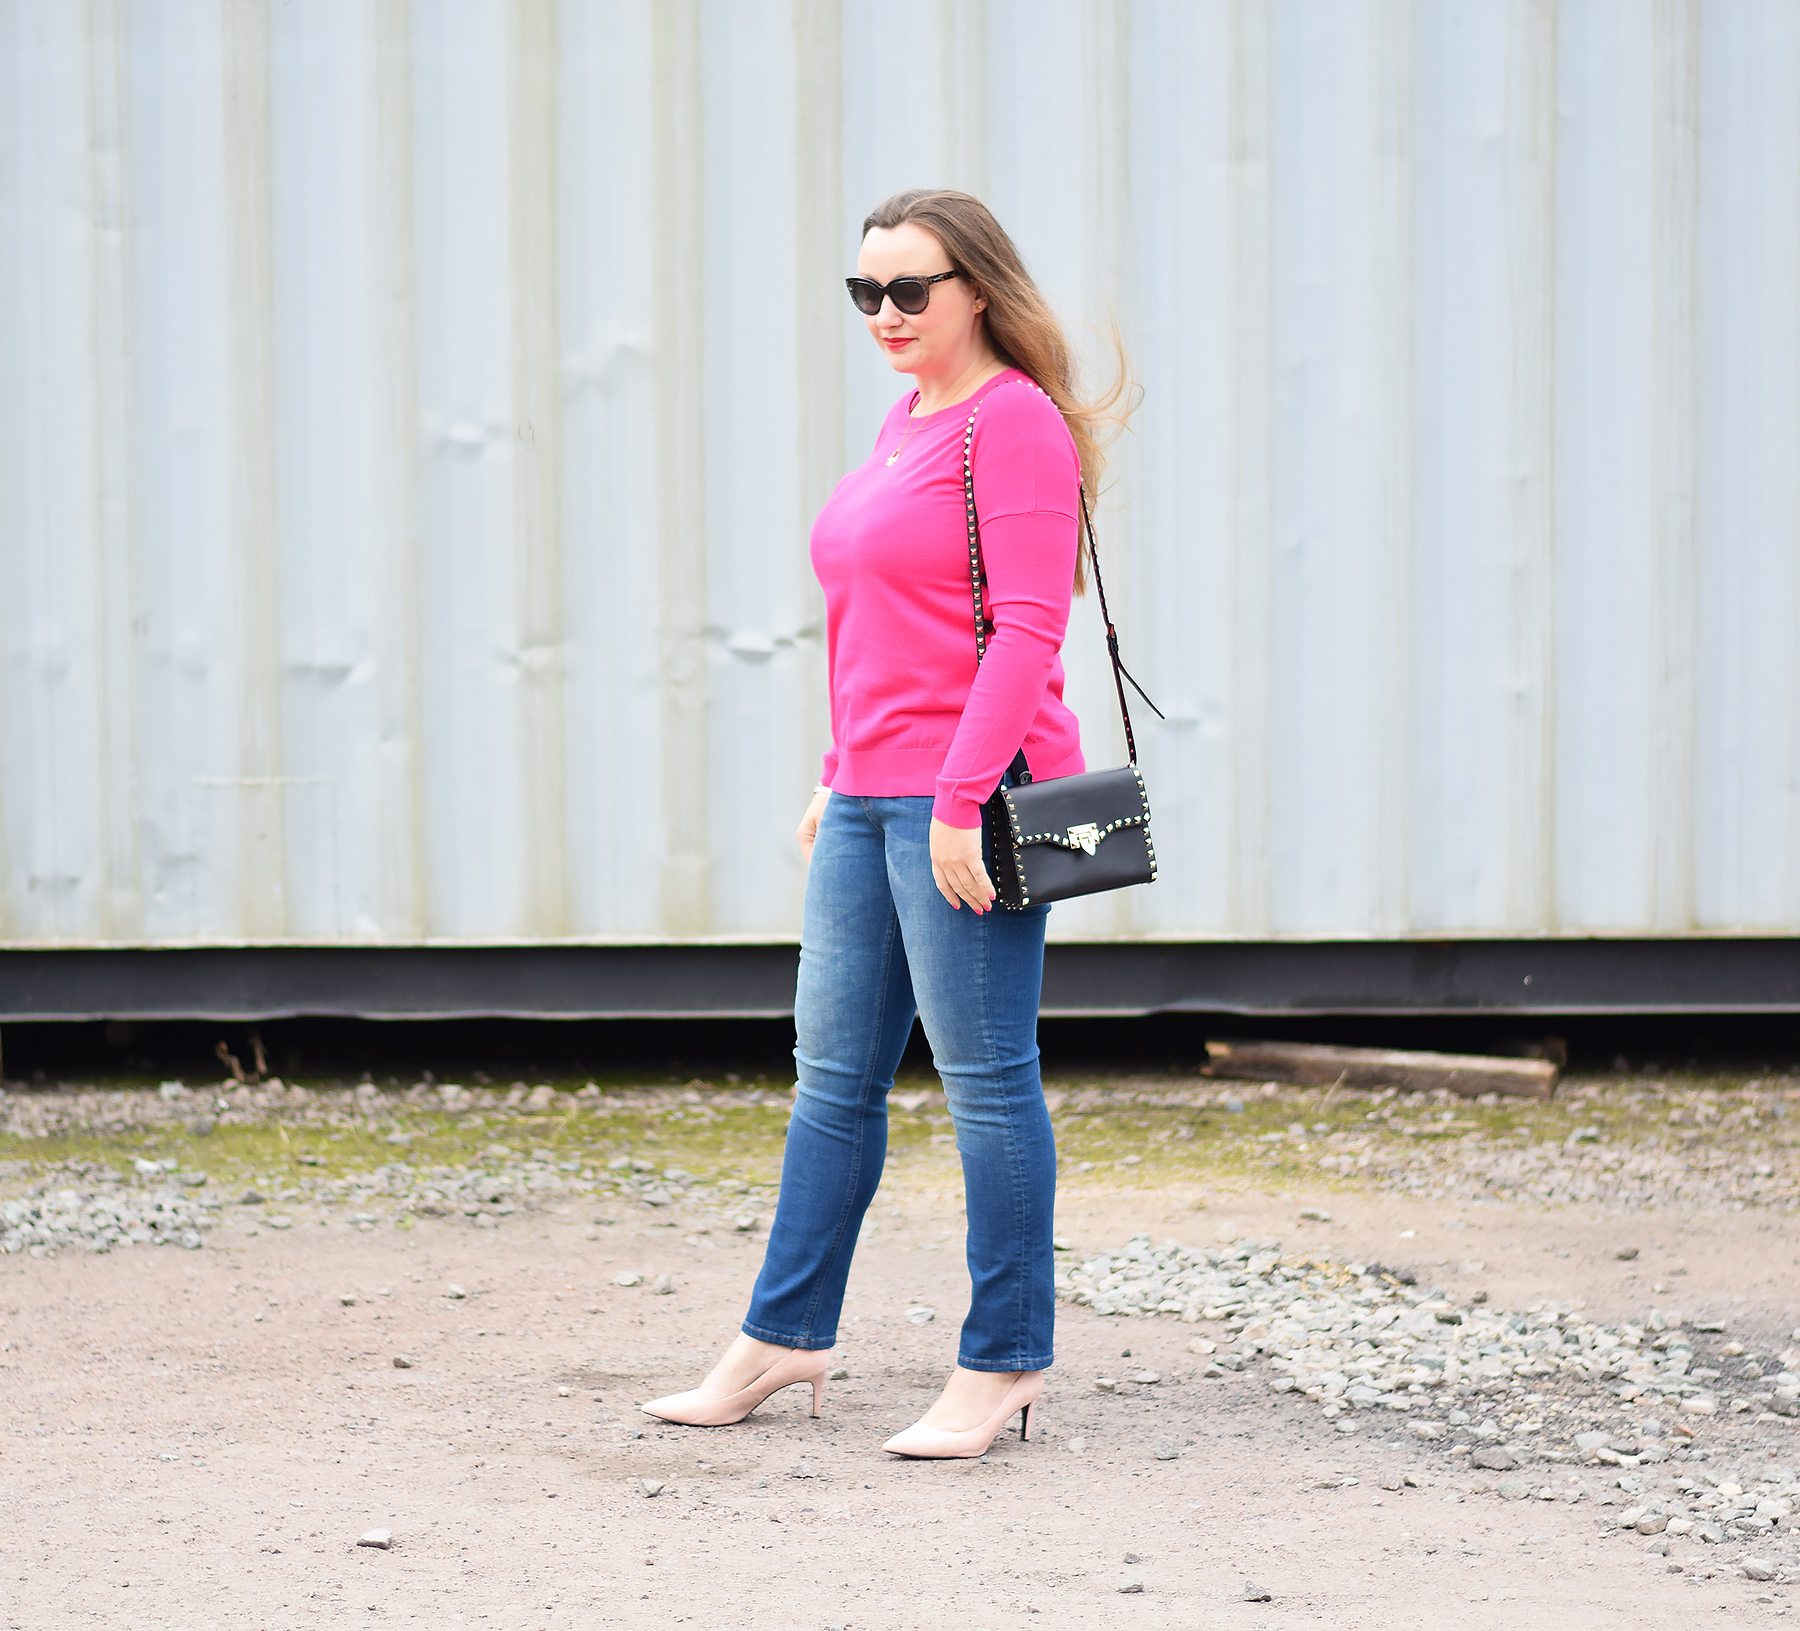 Boden Pink Jumper Outfit and Cavendish Girlfriend Jeans